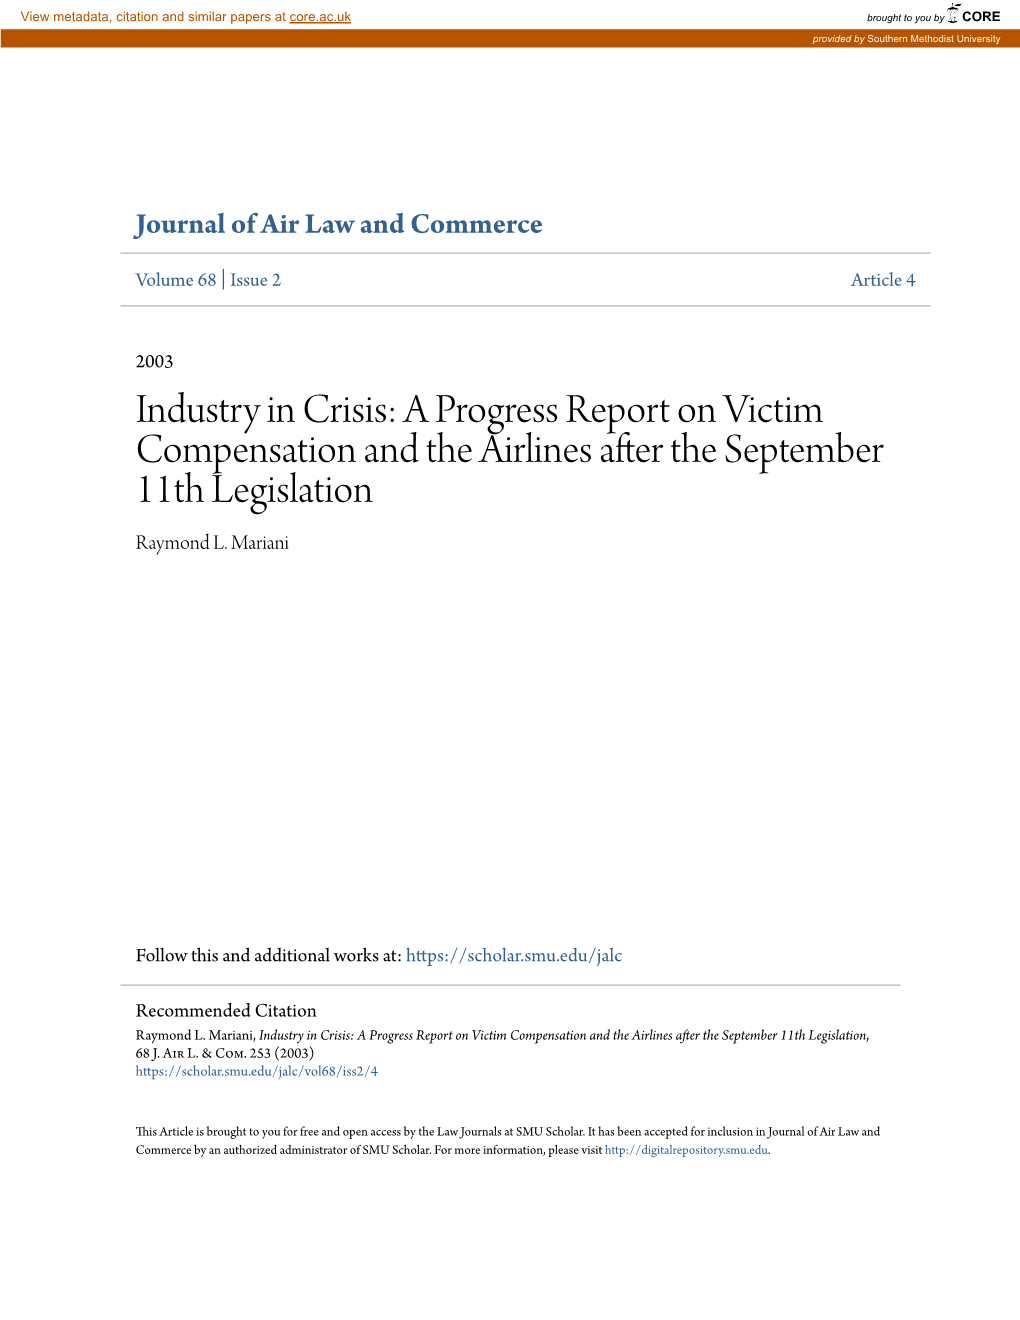 A Progress Report on Victim Compensation and the Airlines After the September 11Th Legislation Raymond L